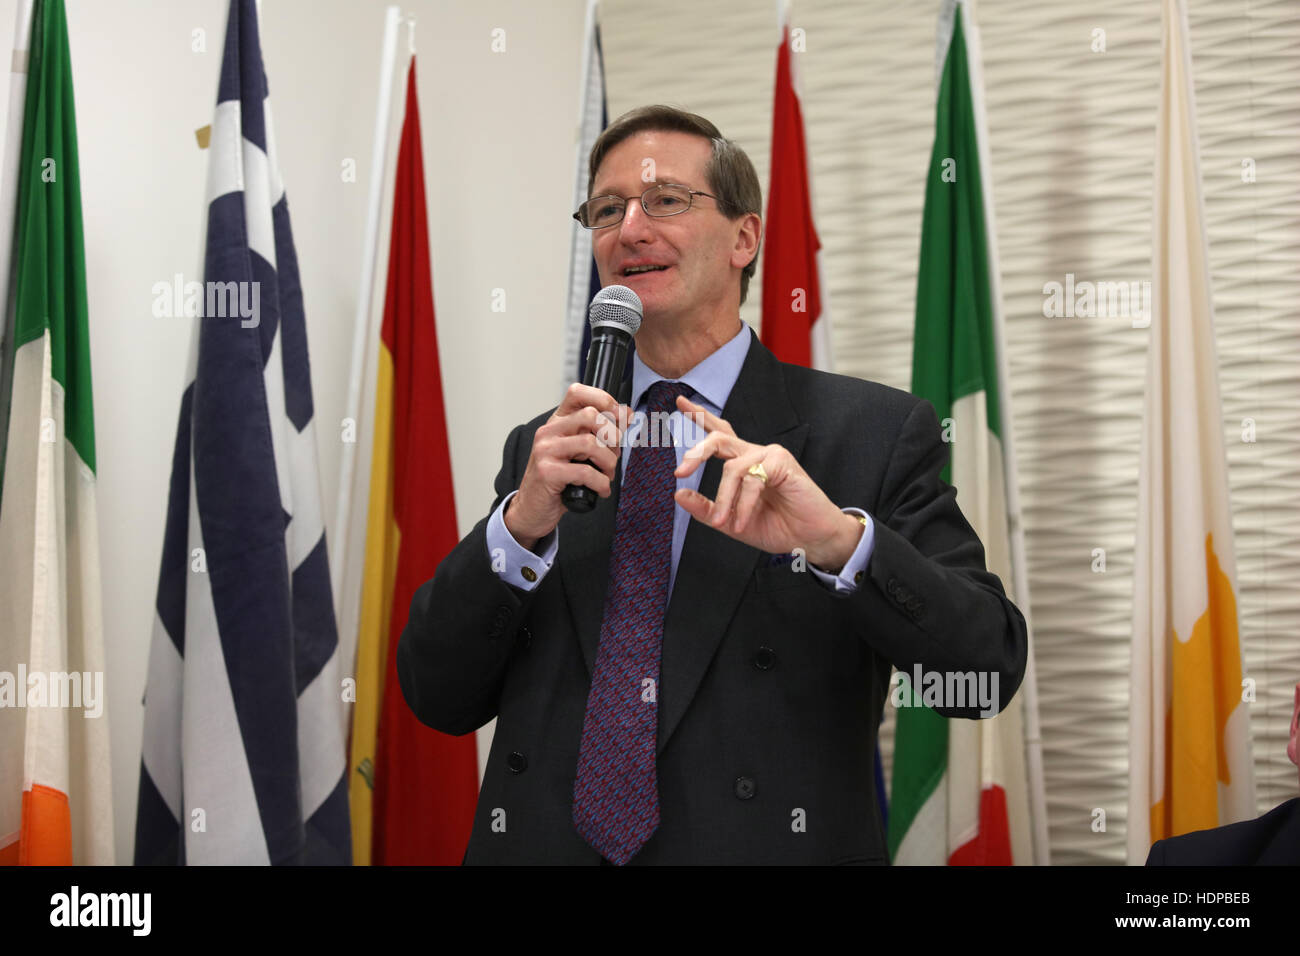 Europe and the People discussion at the Foreign Policy Exchange  Featuring: RT HON DOMINIC GRIEVE QC MP Where: London, United Kingdom When: 26 Oct 2016 Stock Photo